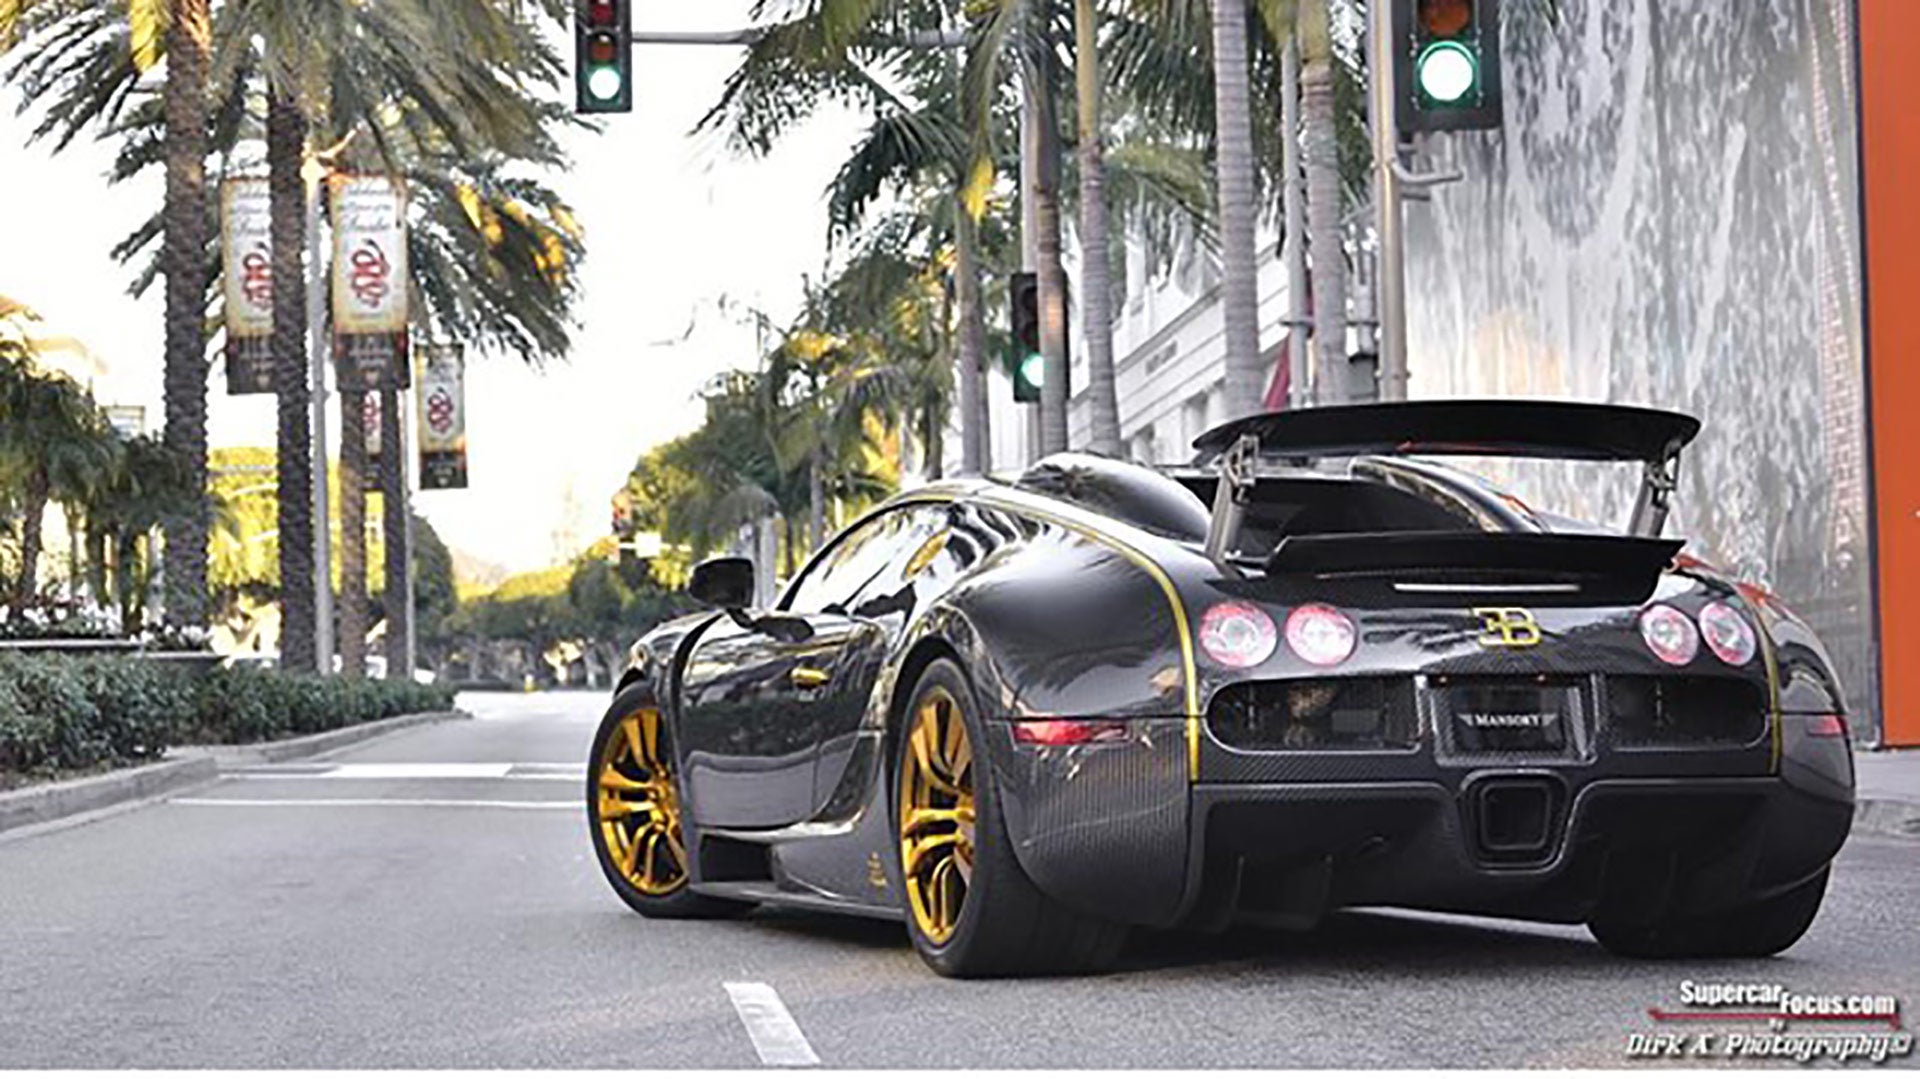 This One-Off Mansory Bugatti Veyron Could Be Yours for $2,000,000